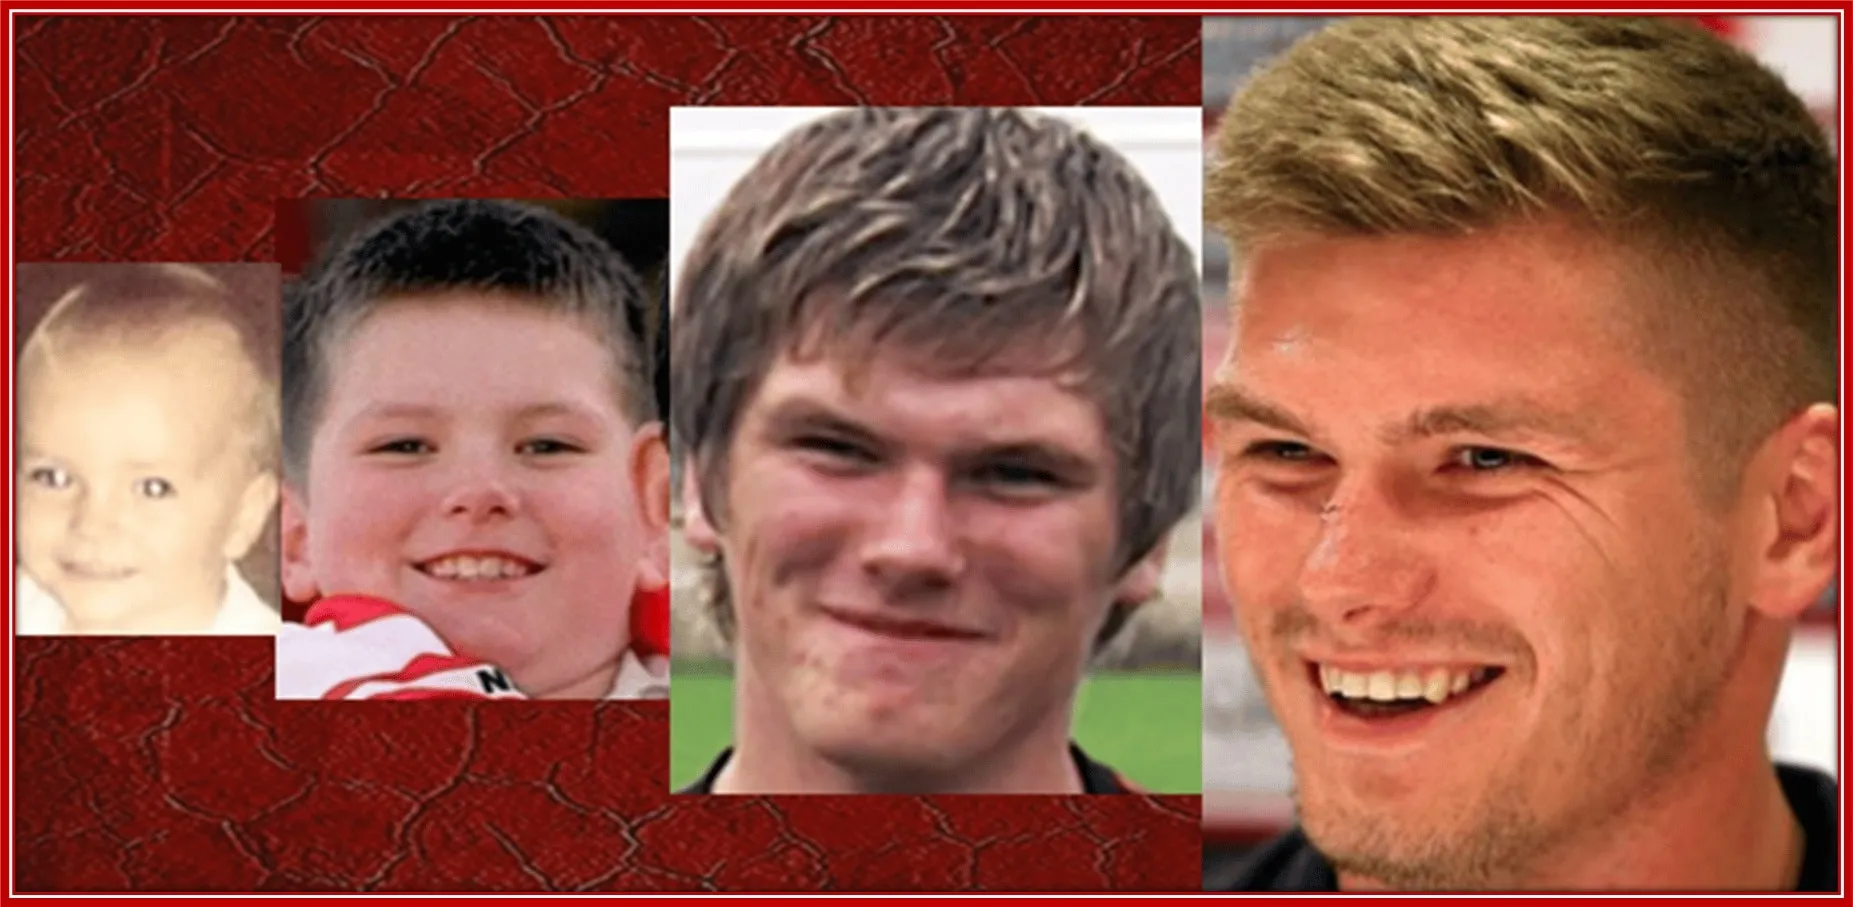 Owen Farrell's Childhood Story and Biography - Behold his story from boyhood until his rise to fame.